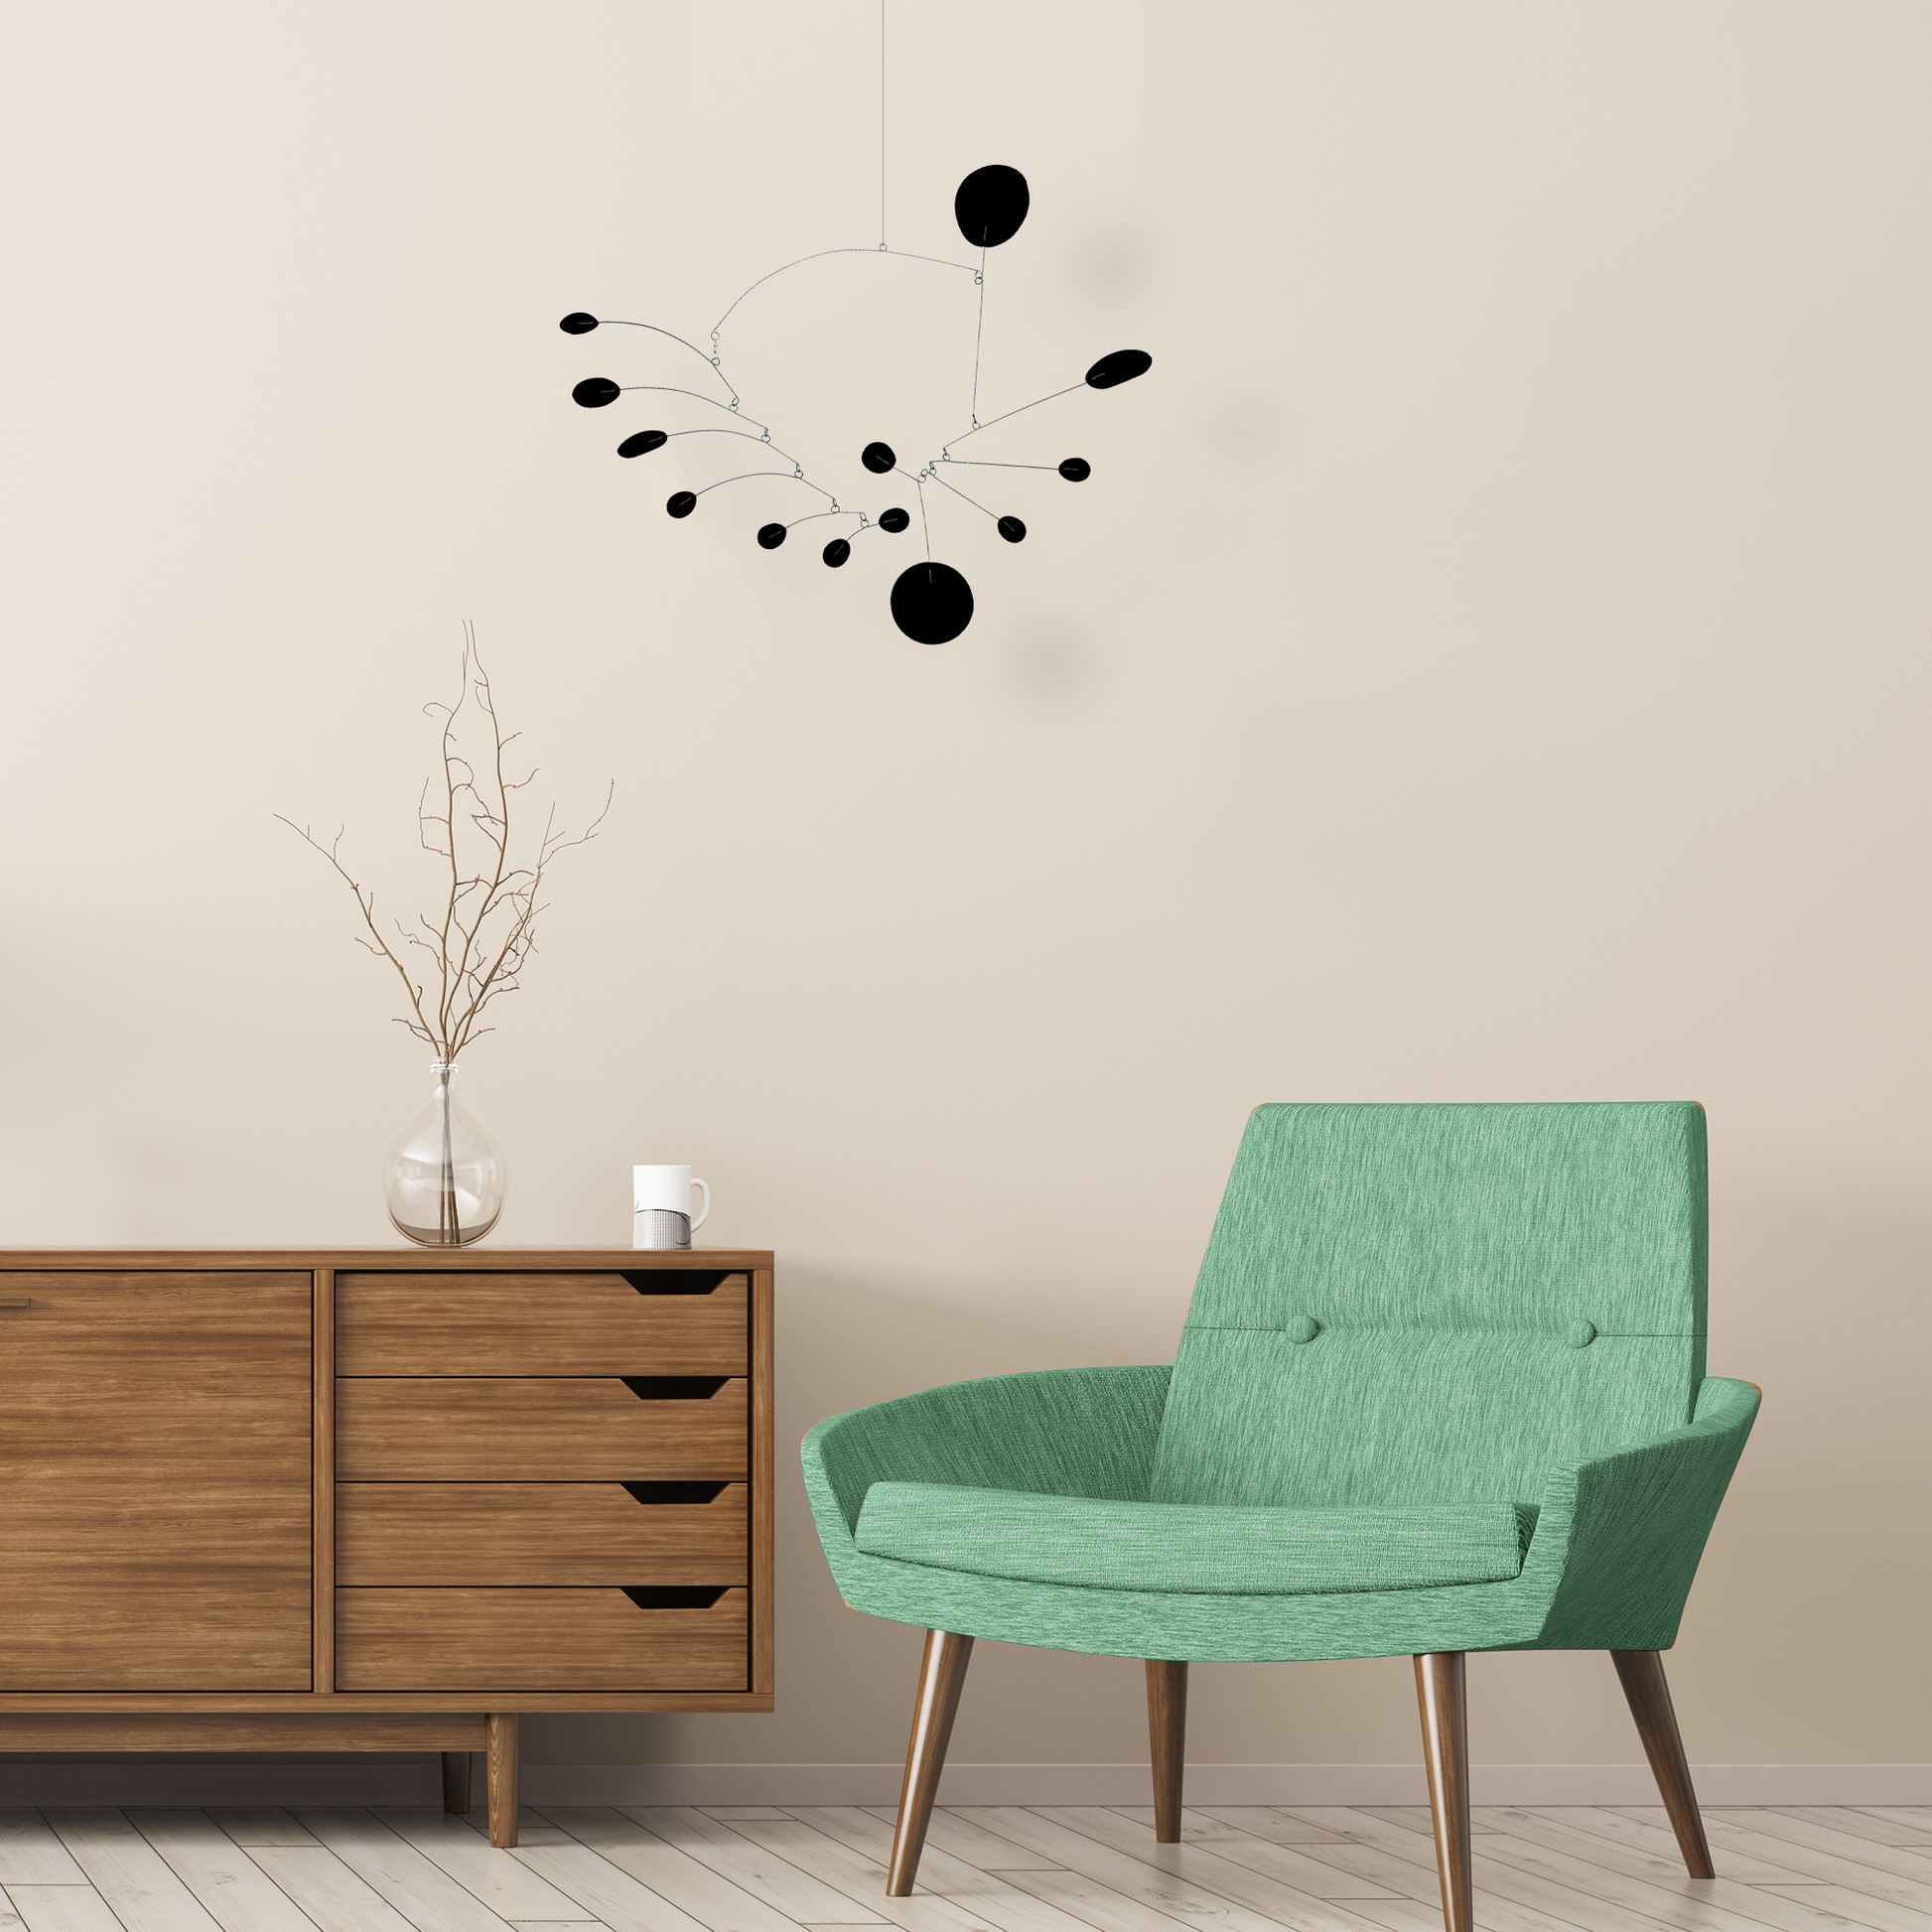 Black Papillon Hanging Art Mobile in mid century modern room with wood sideboard credenza, aqua mcm chair, plant, and coffee mug - kinetic mobile sculpture by AtomicMobiles.com